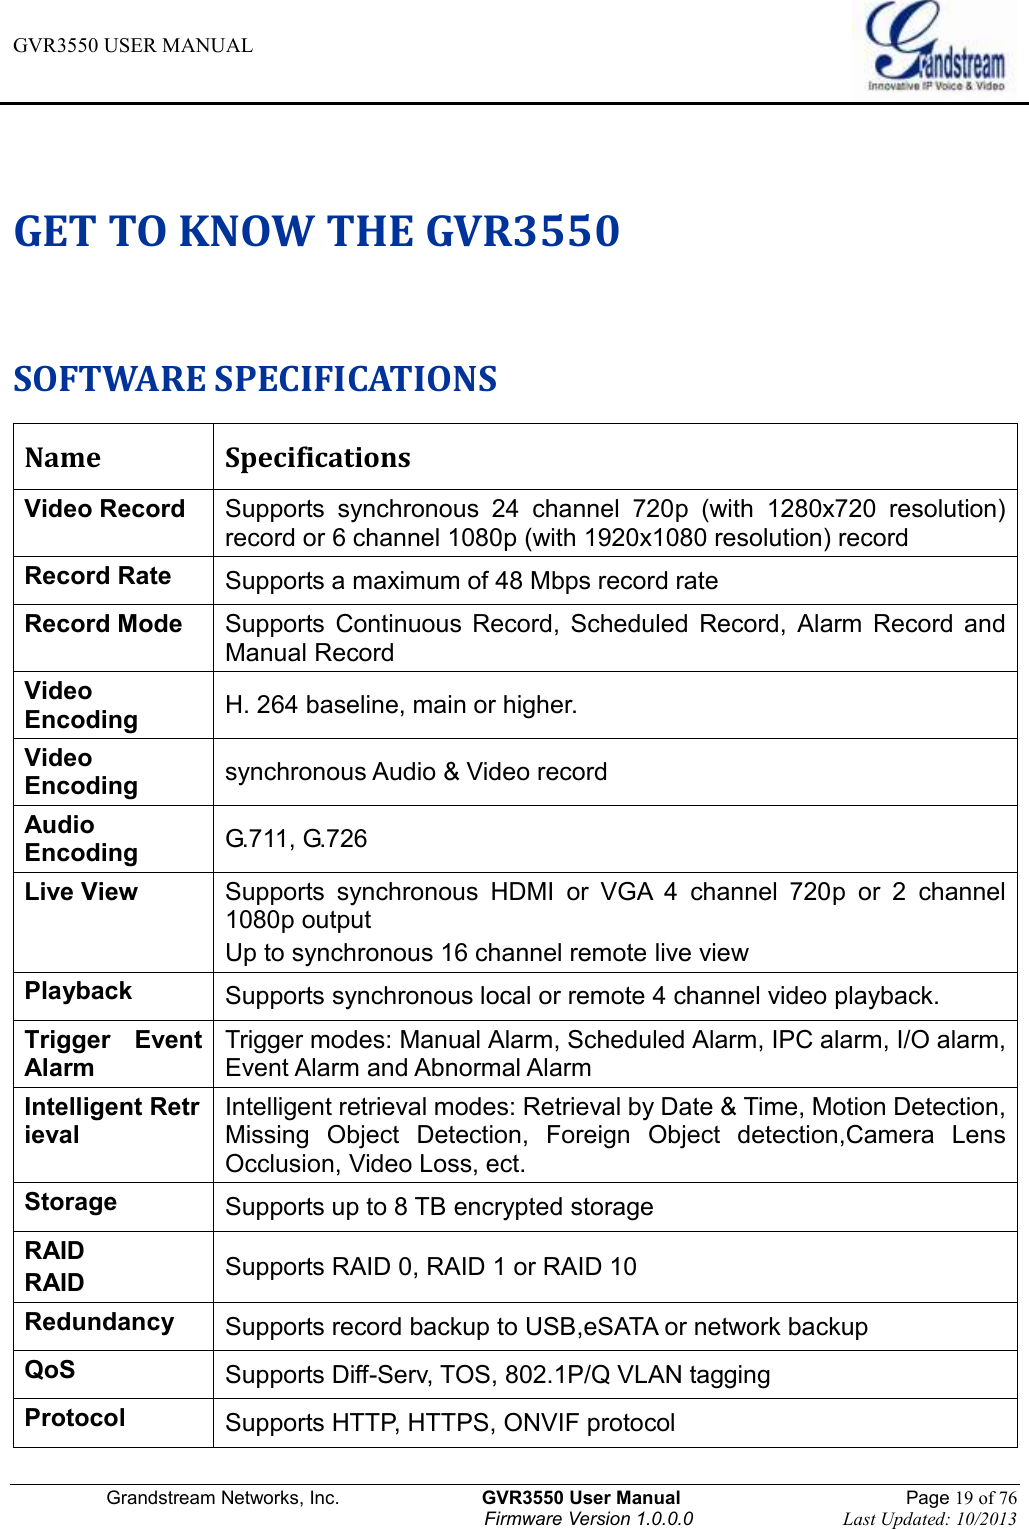 GVR3550 USER MANUAL   Grandstream Networks, Inc.                    GVR3550 User Manual                                                Page 19 of 76 Firmware Version 1.0.0.0                                Last Updated: 10/2013  GET TO KNOW THE GVR3550 SOFTWARE SPECIFICATIONS Name Specifications Video Record Supports  synchronous  24  channel  720p  (with  1280x720  resolution) record or 6 channel 1080p (with 1920x1080 resolution) record Record Rate Supports a maximum of 48 Mbps record rate Record Mode Supports  Continuous  Record,  Scheduled  Record,  Alarm  Record  and Manual Record Video Encoding H. 264 baseline, main or higher. Video Encoding synchronous Audio &amp; Video record Audio Encoding G.711, G.726 Live View Supports  synchronous  HDMI  or  VGA  4  channel  720p  or  2  channel 1080p output Up to synchronous 16 channel remote live view Playback Supports synchronous local or remote 4 channel video playback. Trigger  Event Alarm Trigger modes: Manual Alarm, Scheduled Alarm, IPC alarm, I/O alarm, Event Alarm and Abnormal Alarm Intelligent Retrieval Intelligent retrieval modes: Retrieval by Date &amp; Time, Motion Detection, Missing  Object  Detection,  Foreign  Object  detection,Camera  Lens Occlusion, Video Loss, ect. Storage Supports up to 8 TB encrypted storage RAID RAID Supports RAID 0, RAID 1 or RAID 10 Redundancy Supports record backup to USB,eSATA or network backup QoS Supports Diff-Serv, TOS, 802.1P/Q VLAN tagging Protocol Supports HTTP, HTTPS, ONVIF protocol 